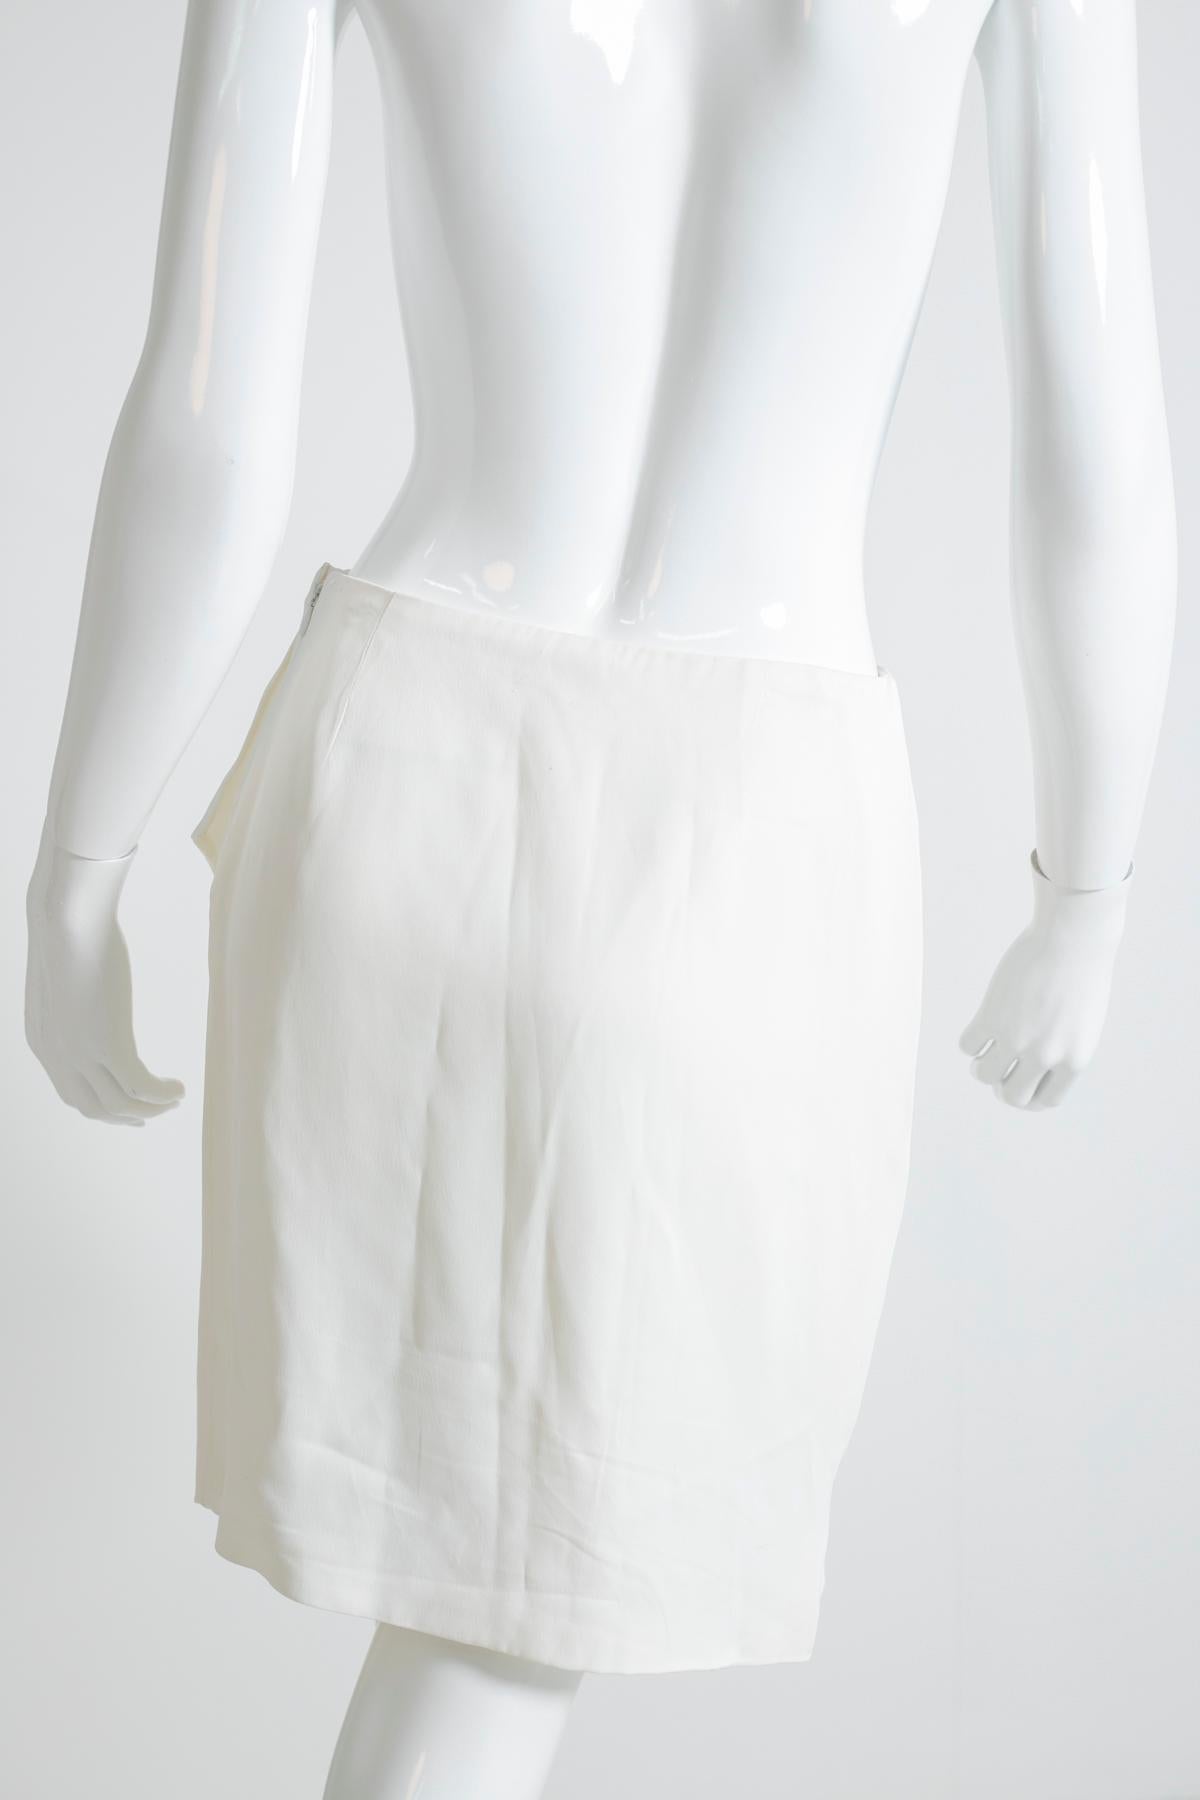 Emanuel Ungaro White Silk Satin Skirt with Ruffle In Good Condition For Sale In Milano, IT